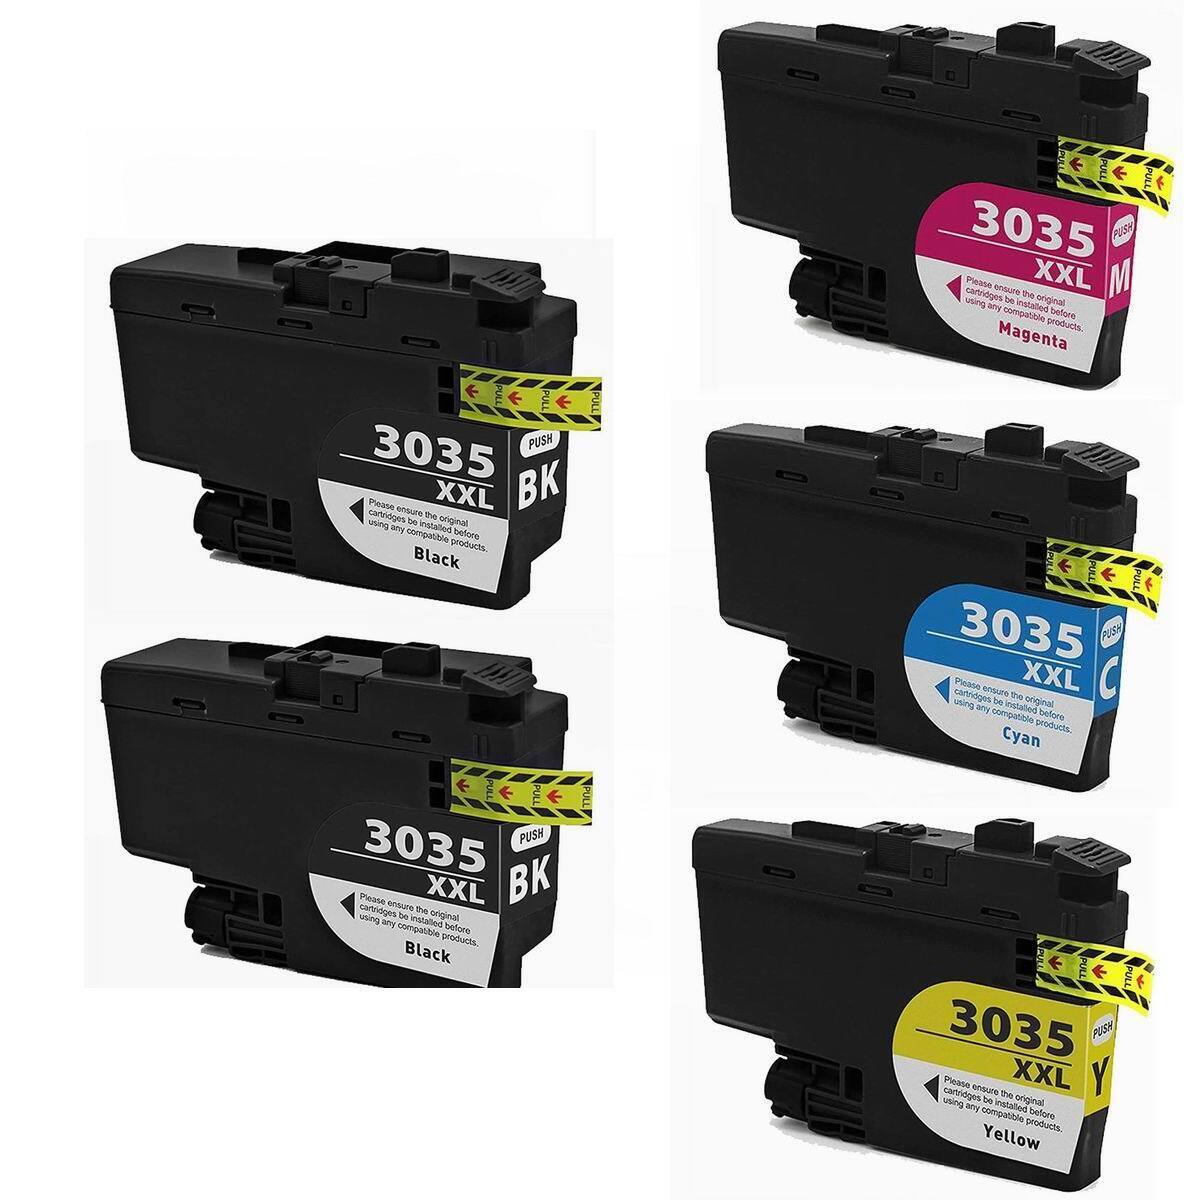 5 Pack Compatible Ink Cartridge for LC3035 3035xxl Ink Cartridge for MFC-J995DW